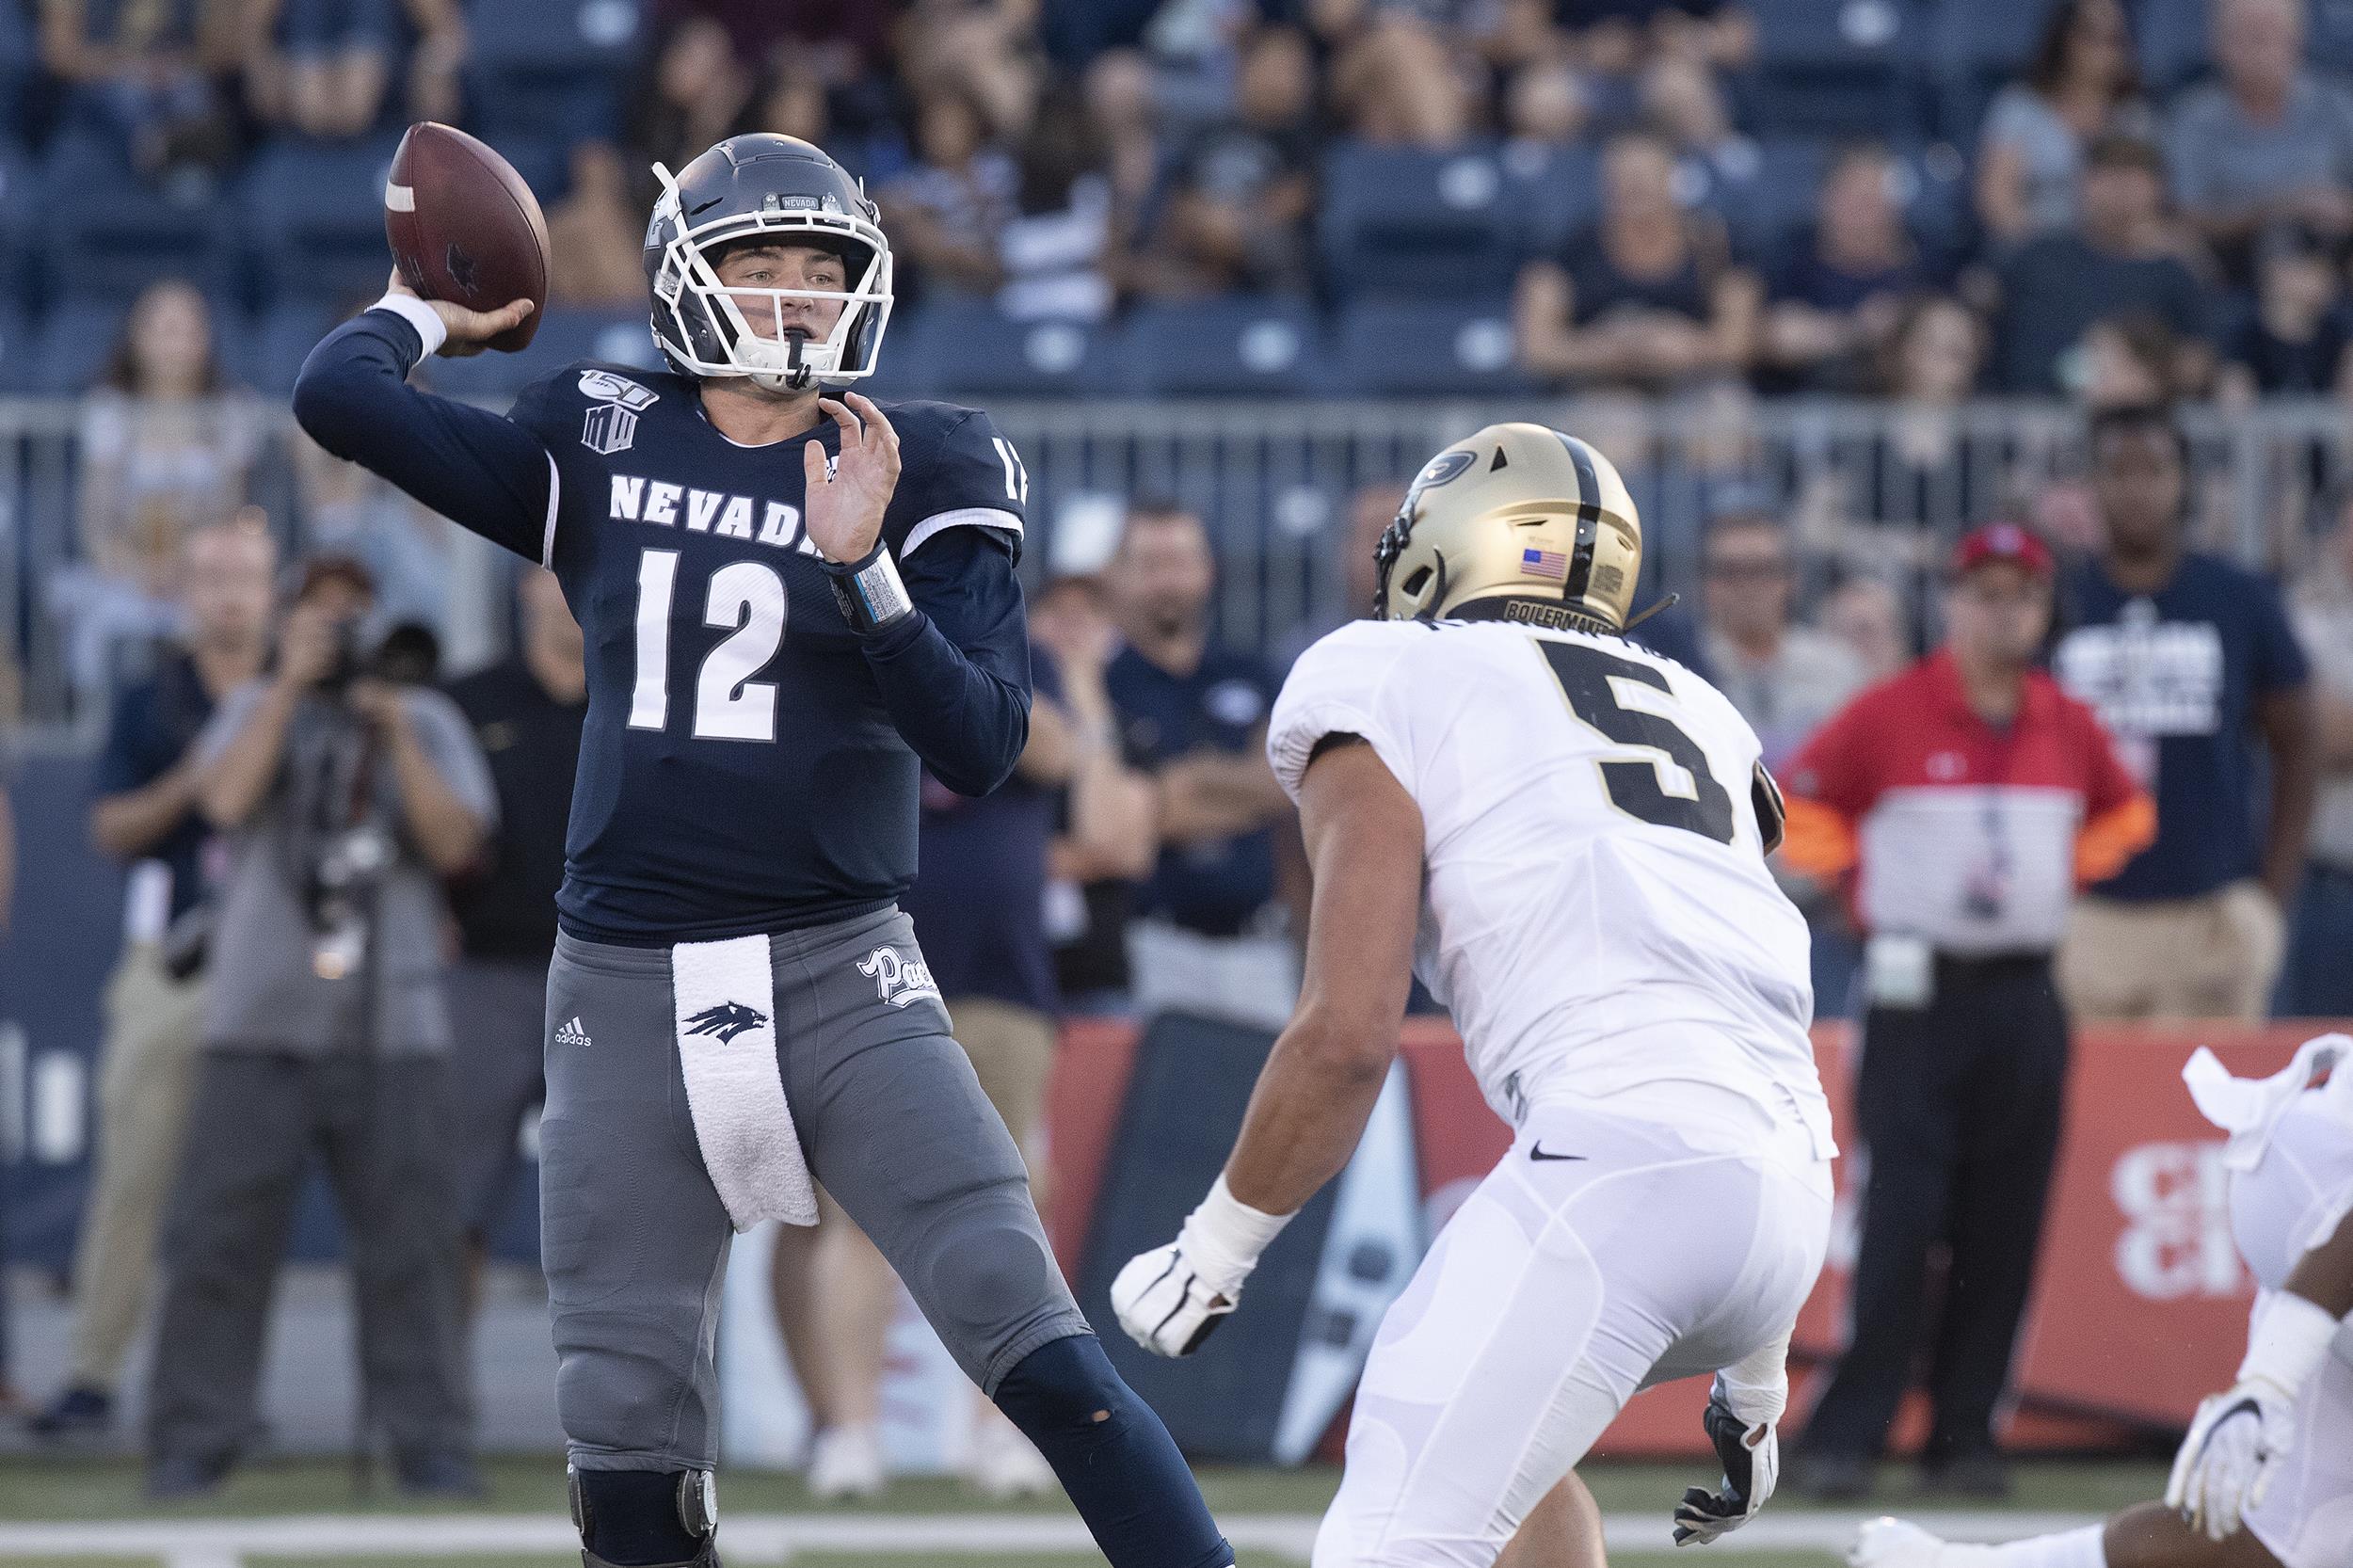 University Of Hawaii Offense Could Run Cold In Chilly Nevada